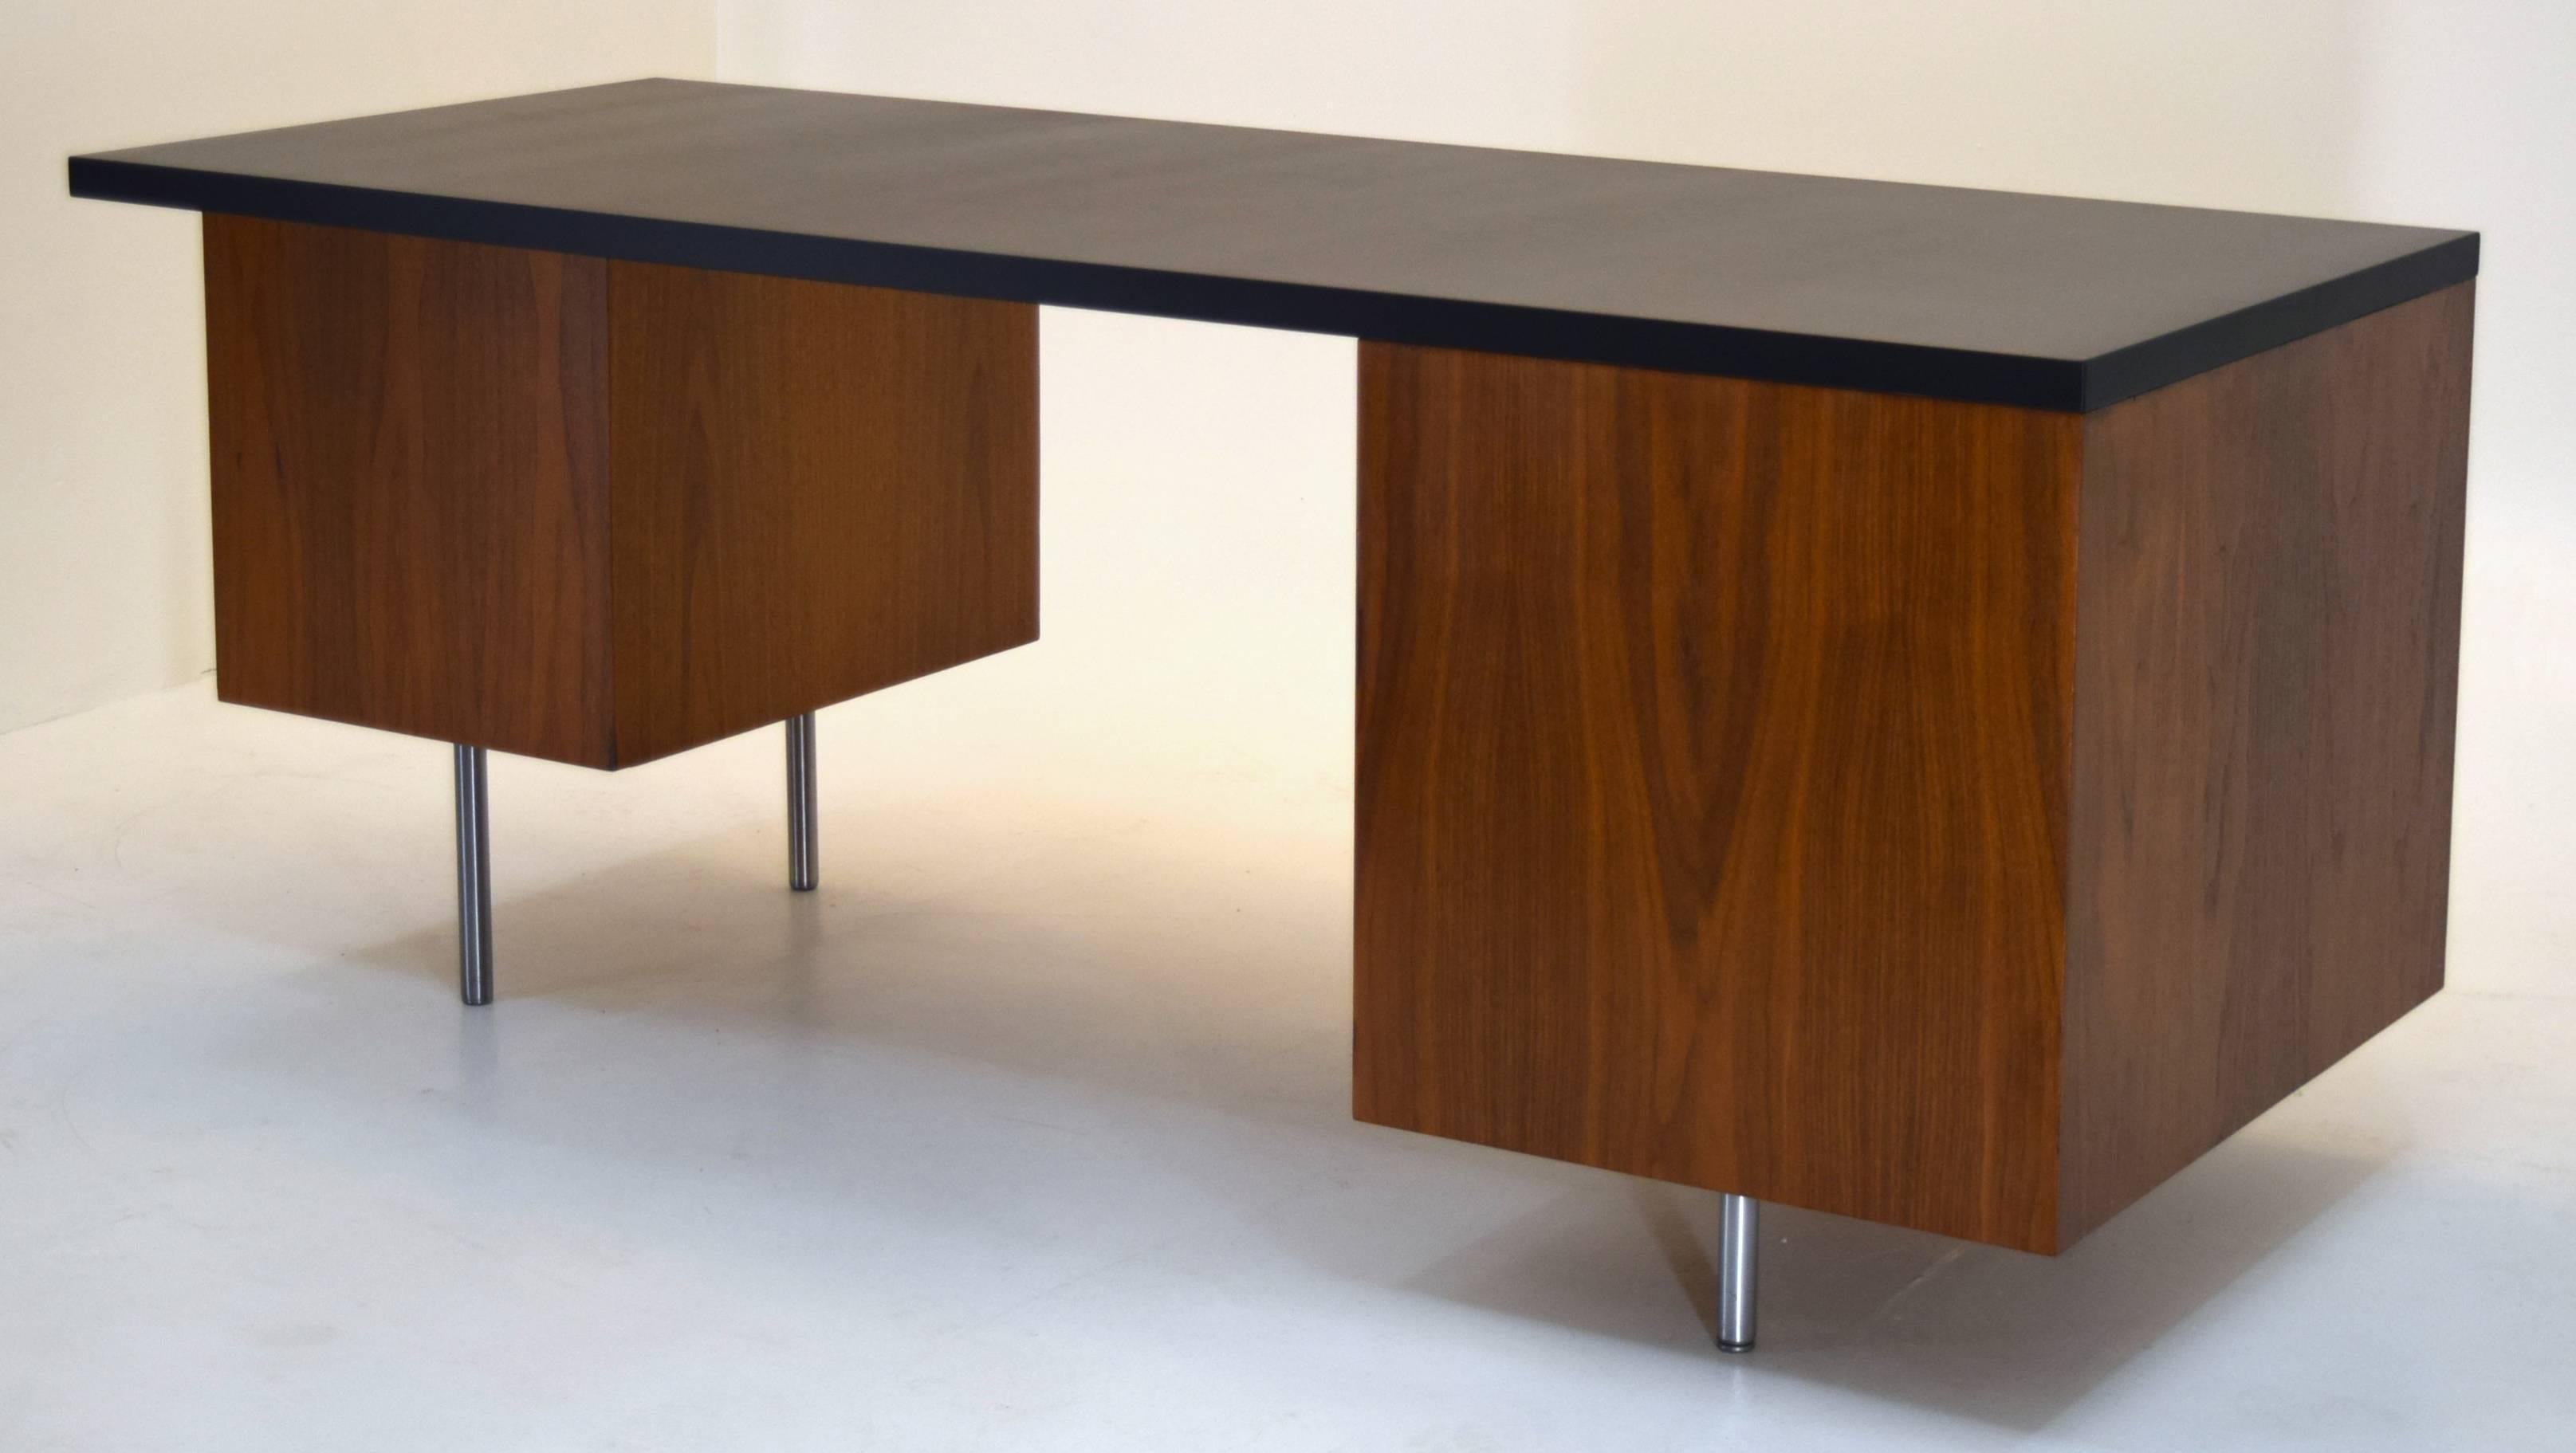 George Nelson & Associates for Herman Miller, USA
Executive Office Group Series with J-pulls, circa 1954.
Walnut, steel. Lacquer.  Measures: 72 wide x 30 deep and 29.75 inches tall. Knee area is 32.5